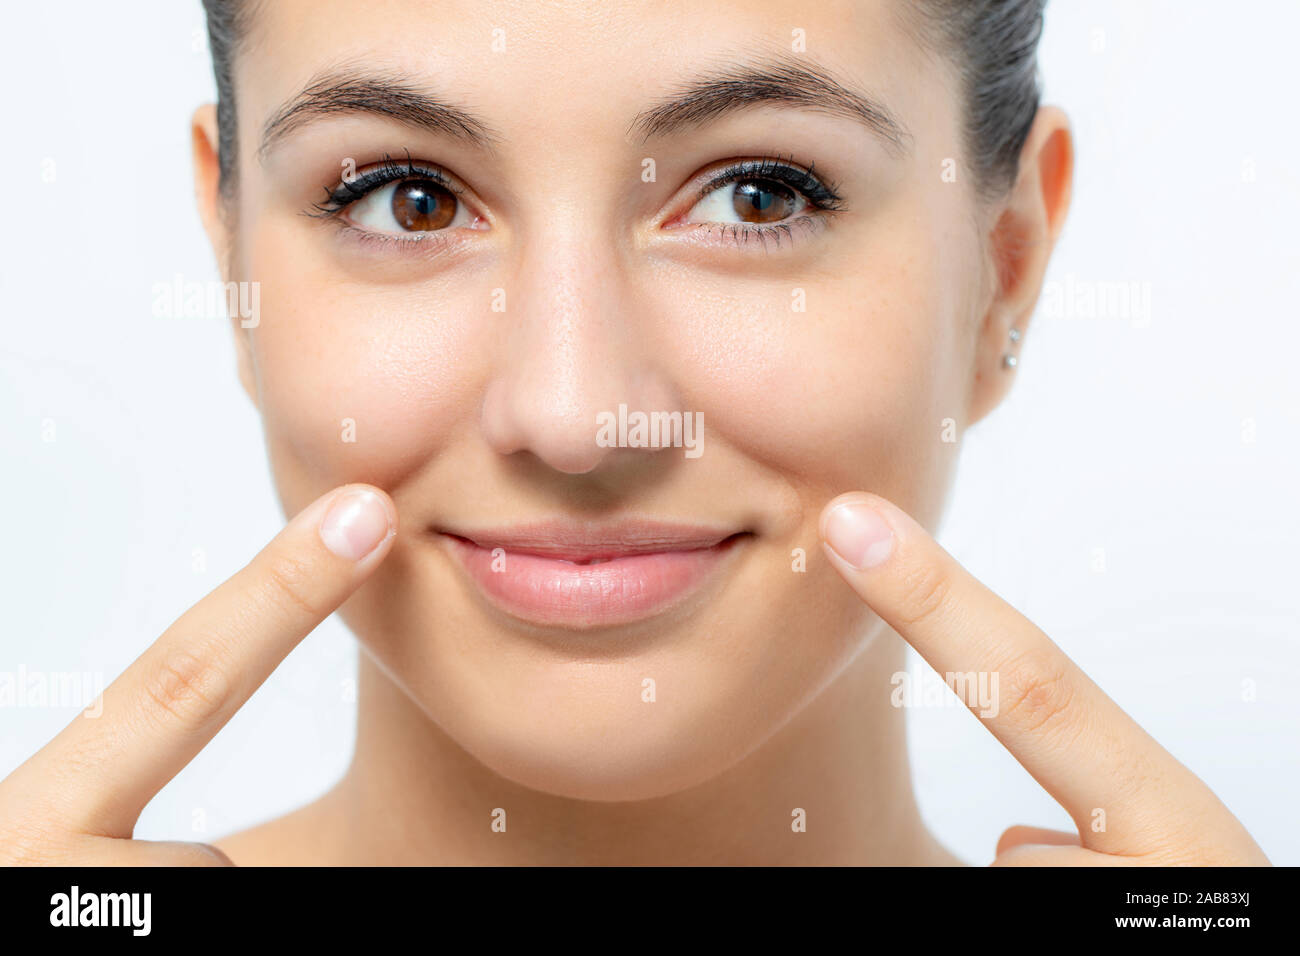 Extreme close up portrait of cute young woman pointing at wrinkles below cheek. Girl with charming smile looking aside.Isolated on white background. Stock Photo